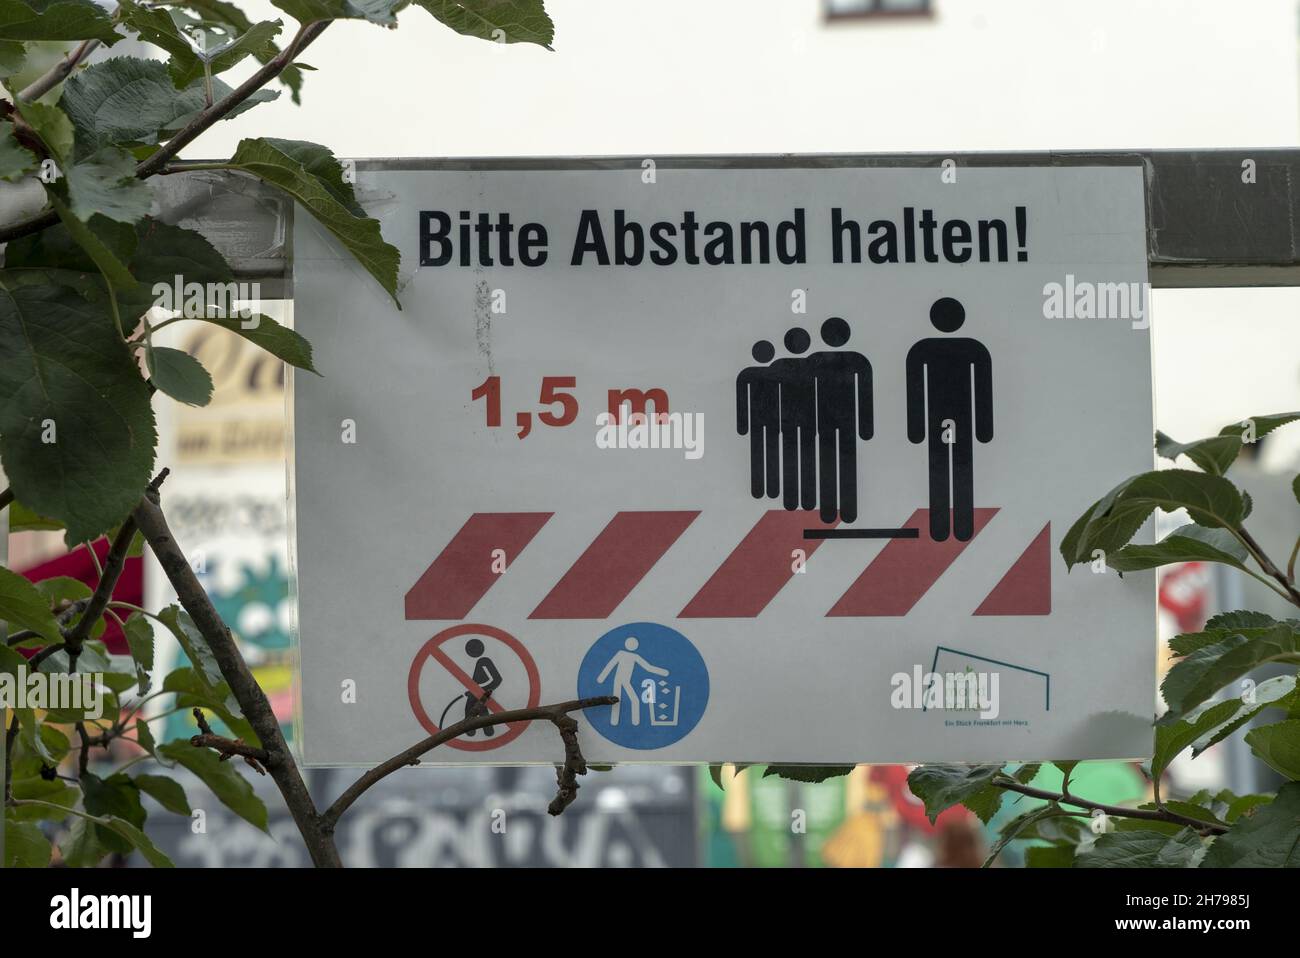 A sign asking to keep a 1,5 m distance (Bitte Abstand halten!) in German Stock Photo